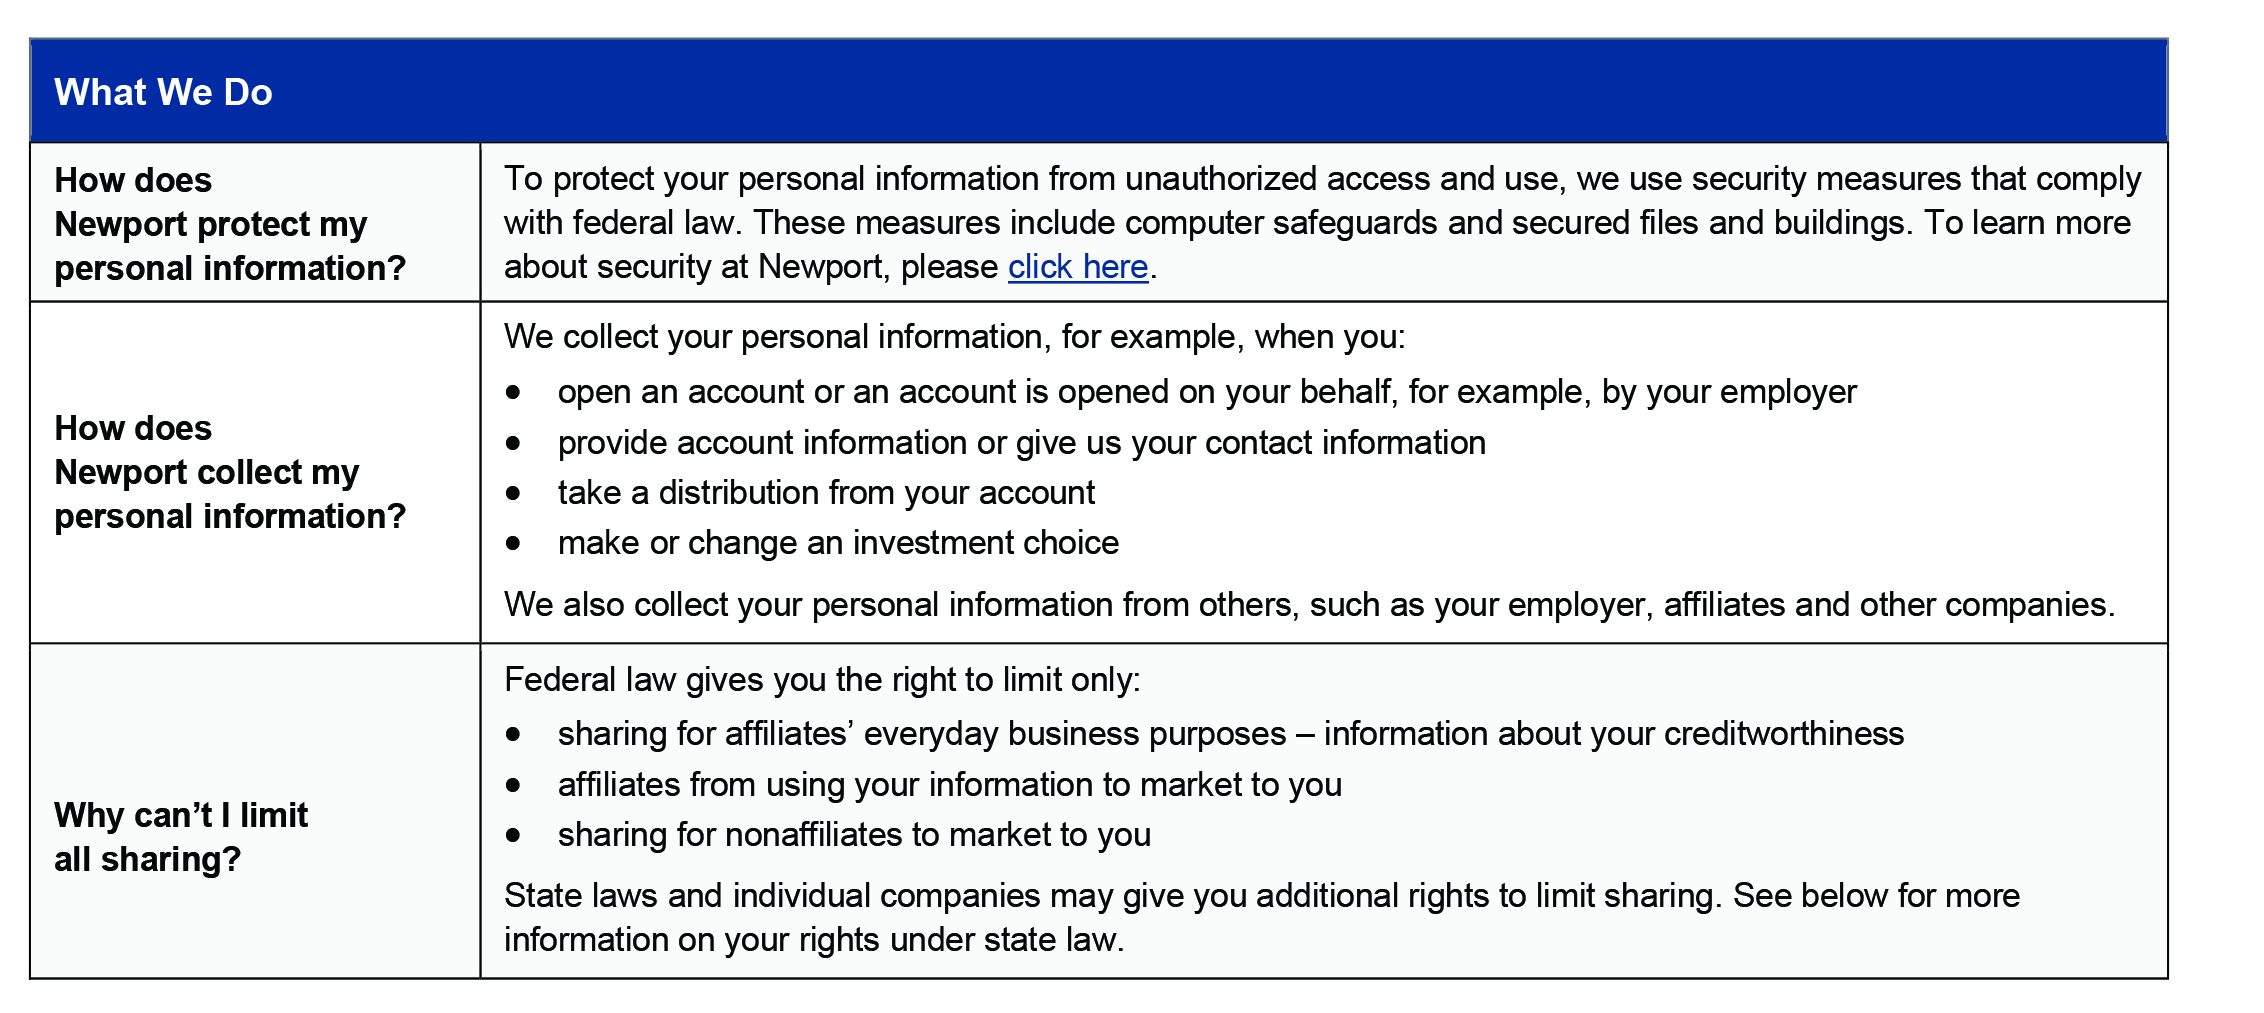 Newport privacy policy image four - What We Do